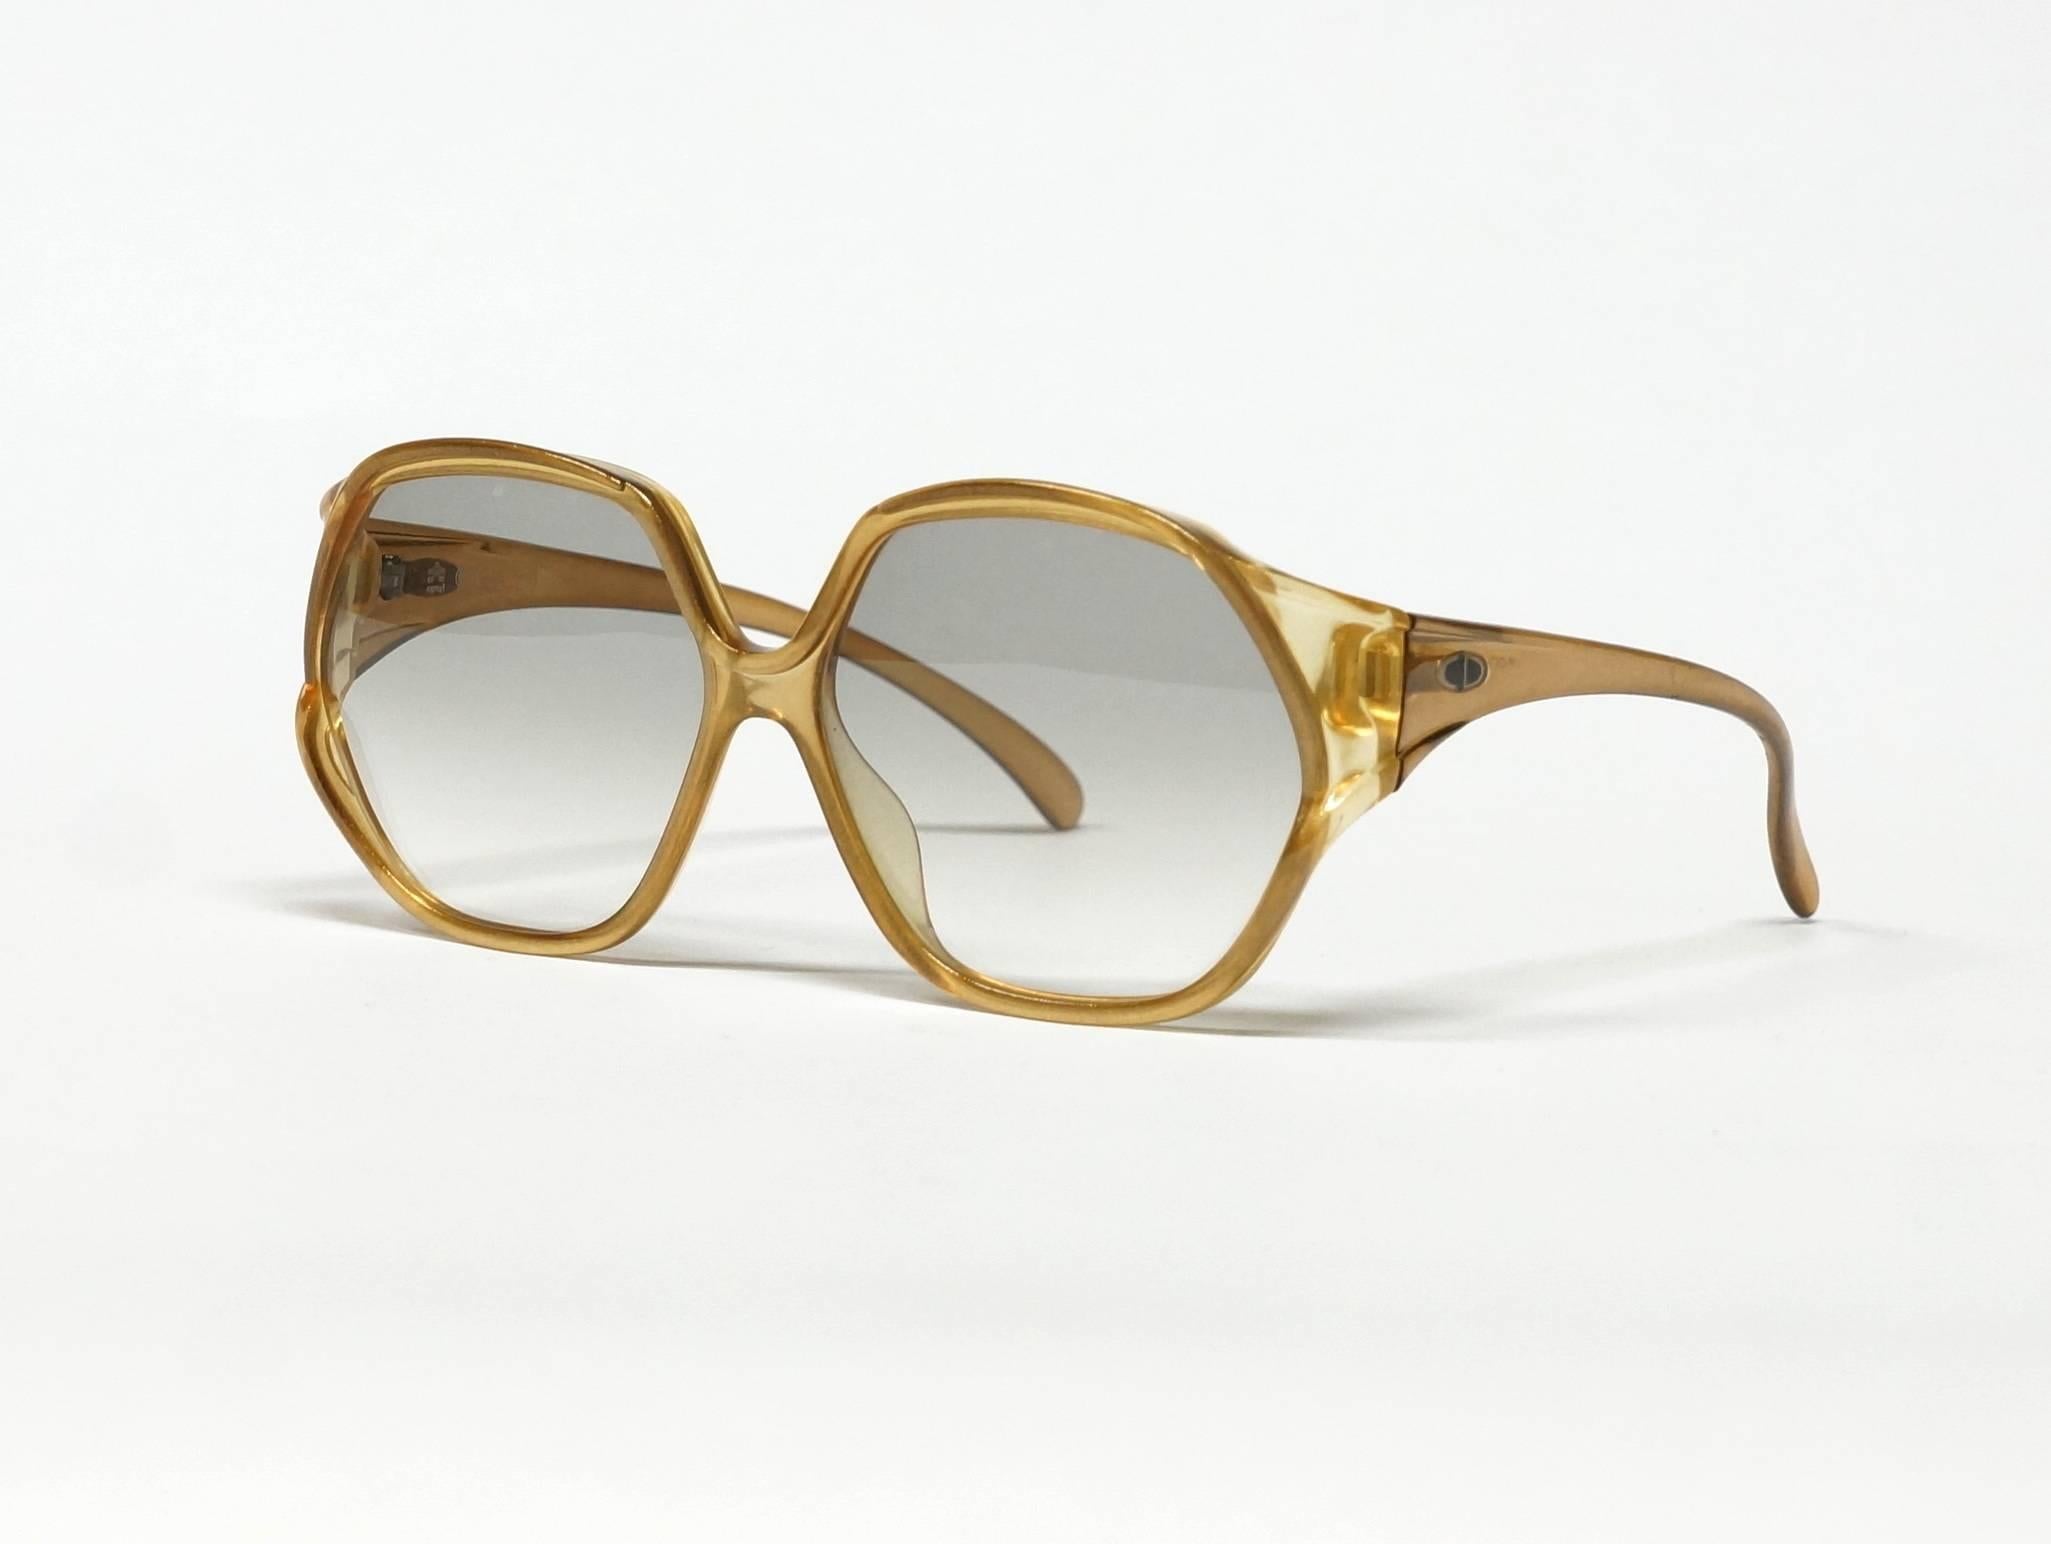 70s Vintage German sunglasses by Christian Dior. Oversized Amber color frame with shiny glitter in lightweight and and long-living Optyl-material.

Model: 2097 10

approximate dimensions:
temple length: 140 mm - 5 1/2